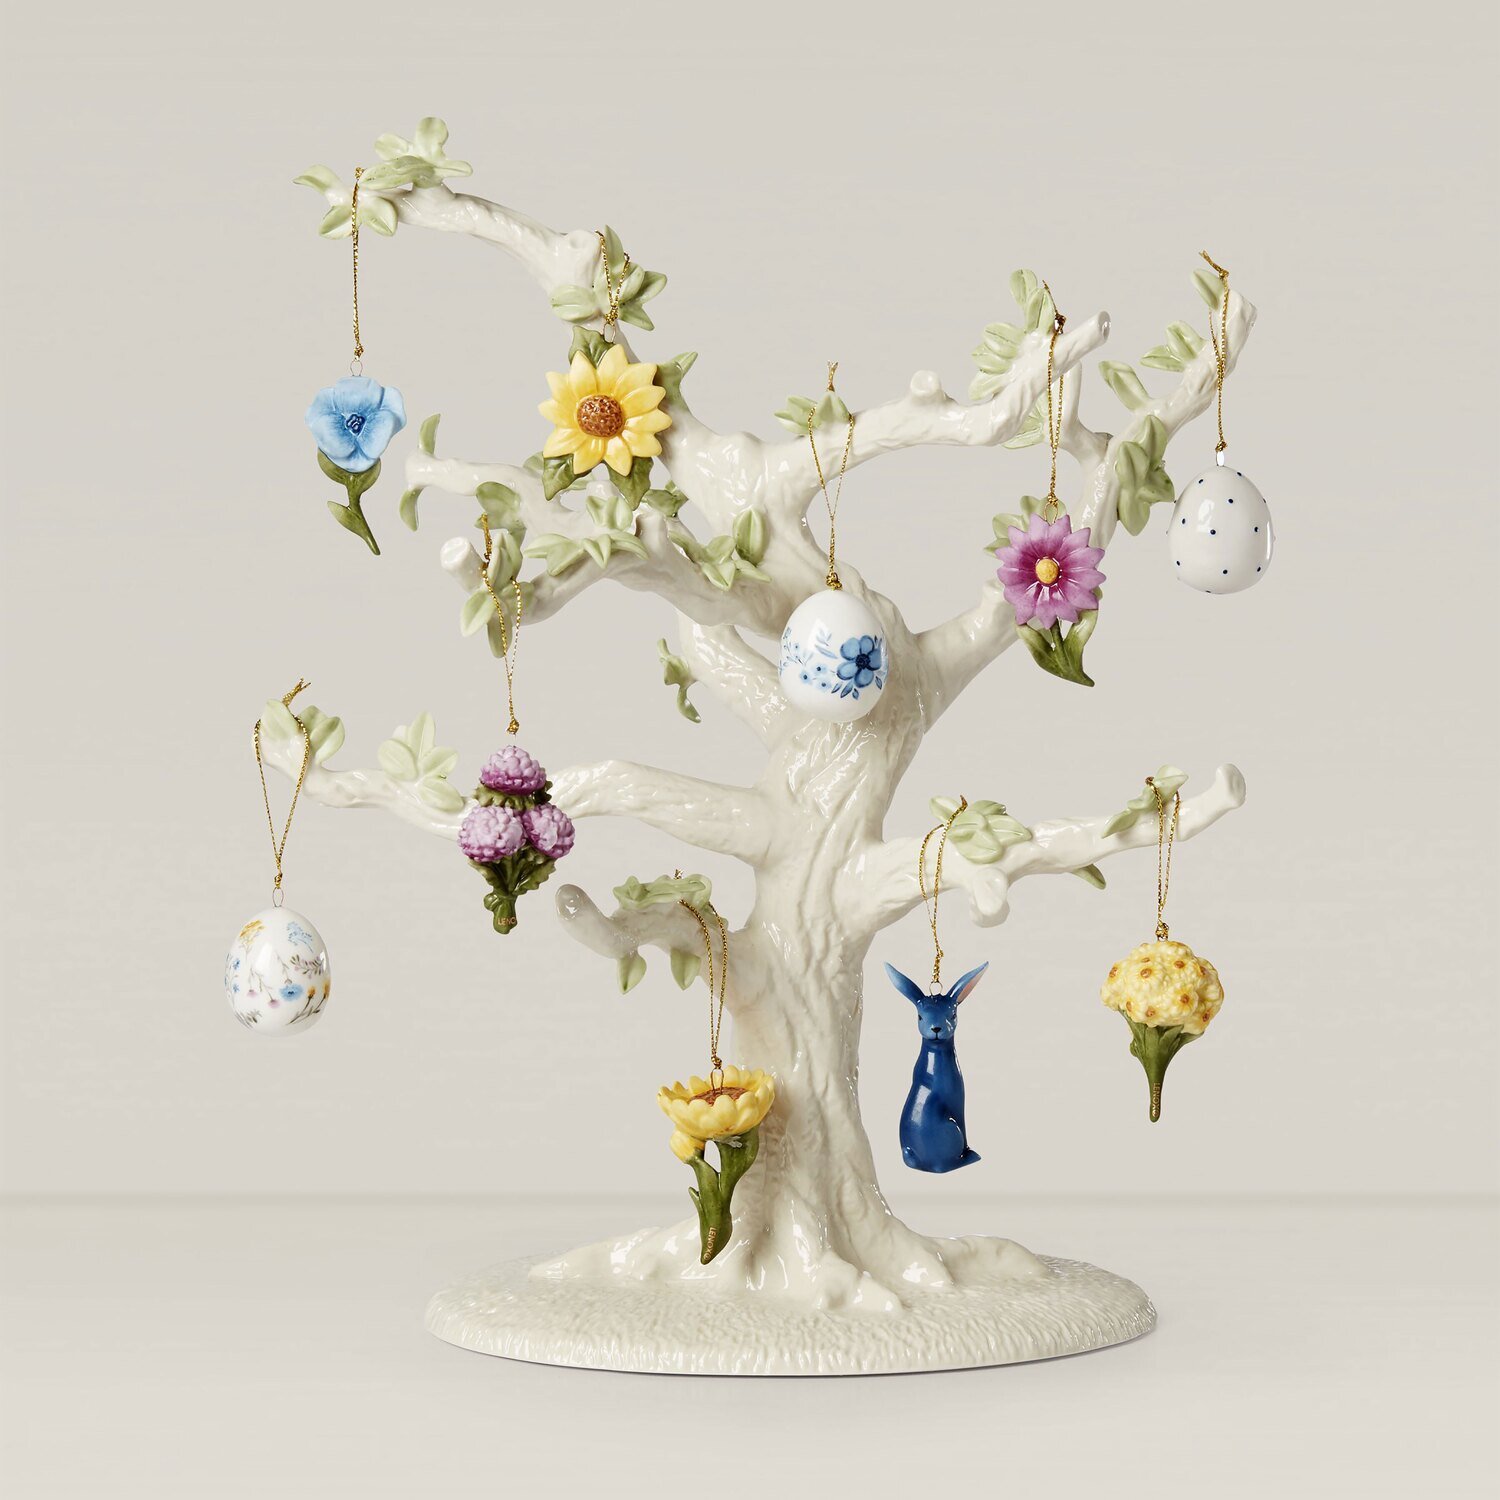 Lenox Ornament Sets Floral Easter10-Piece Ornament Set and Tree 893394